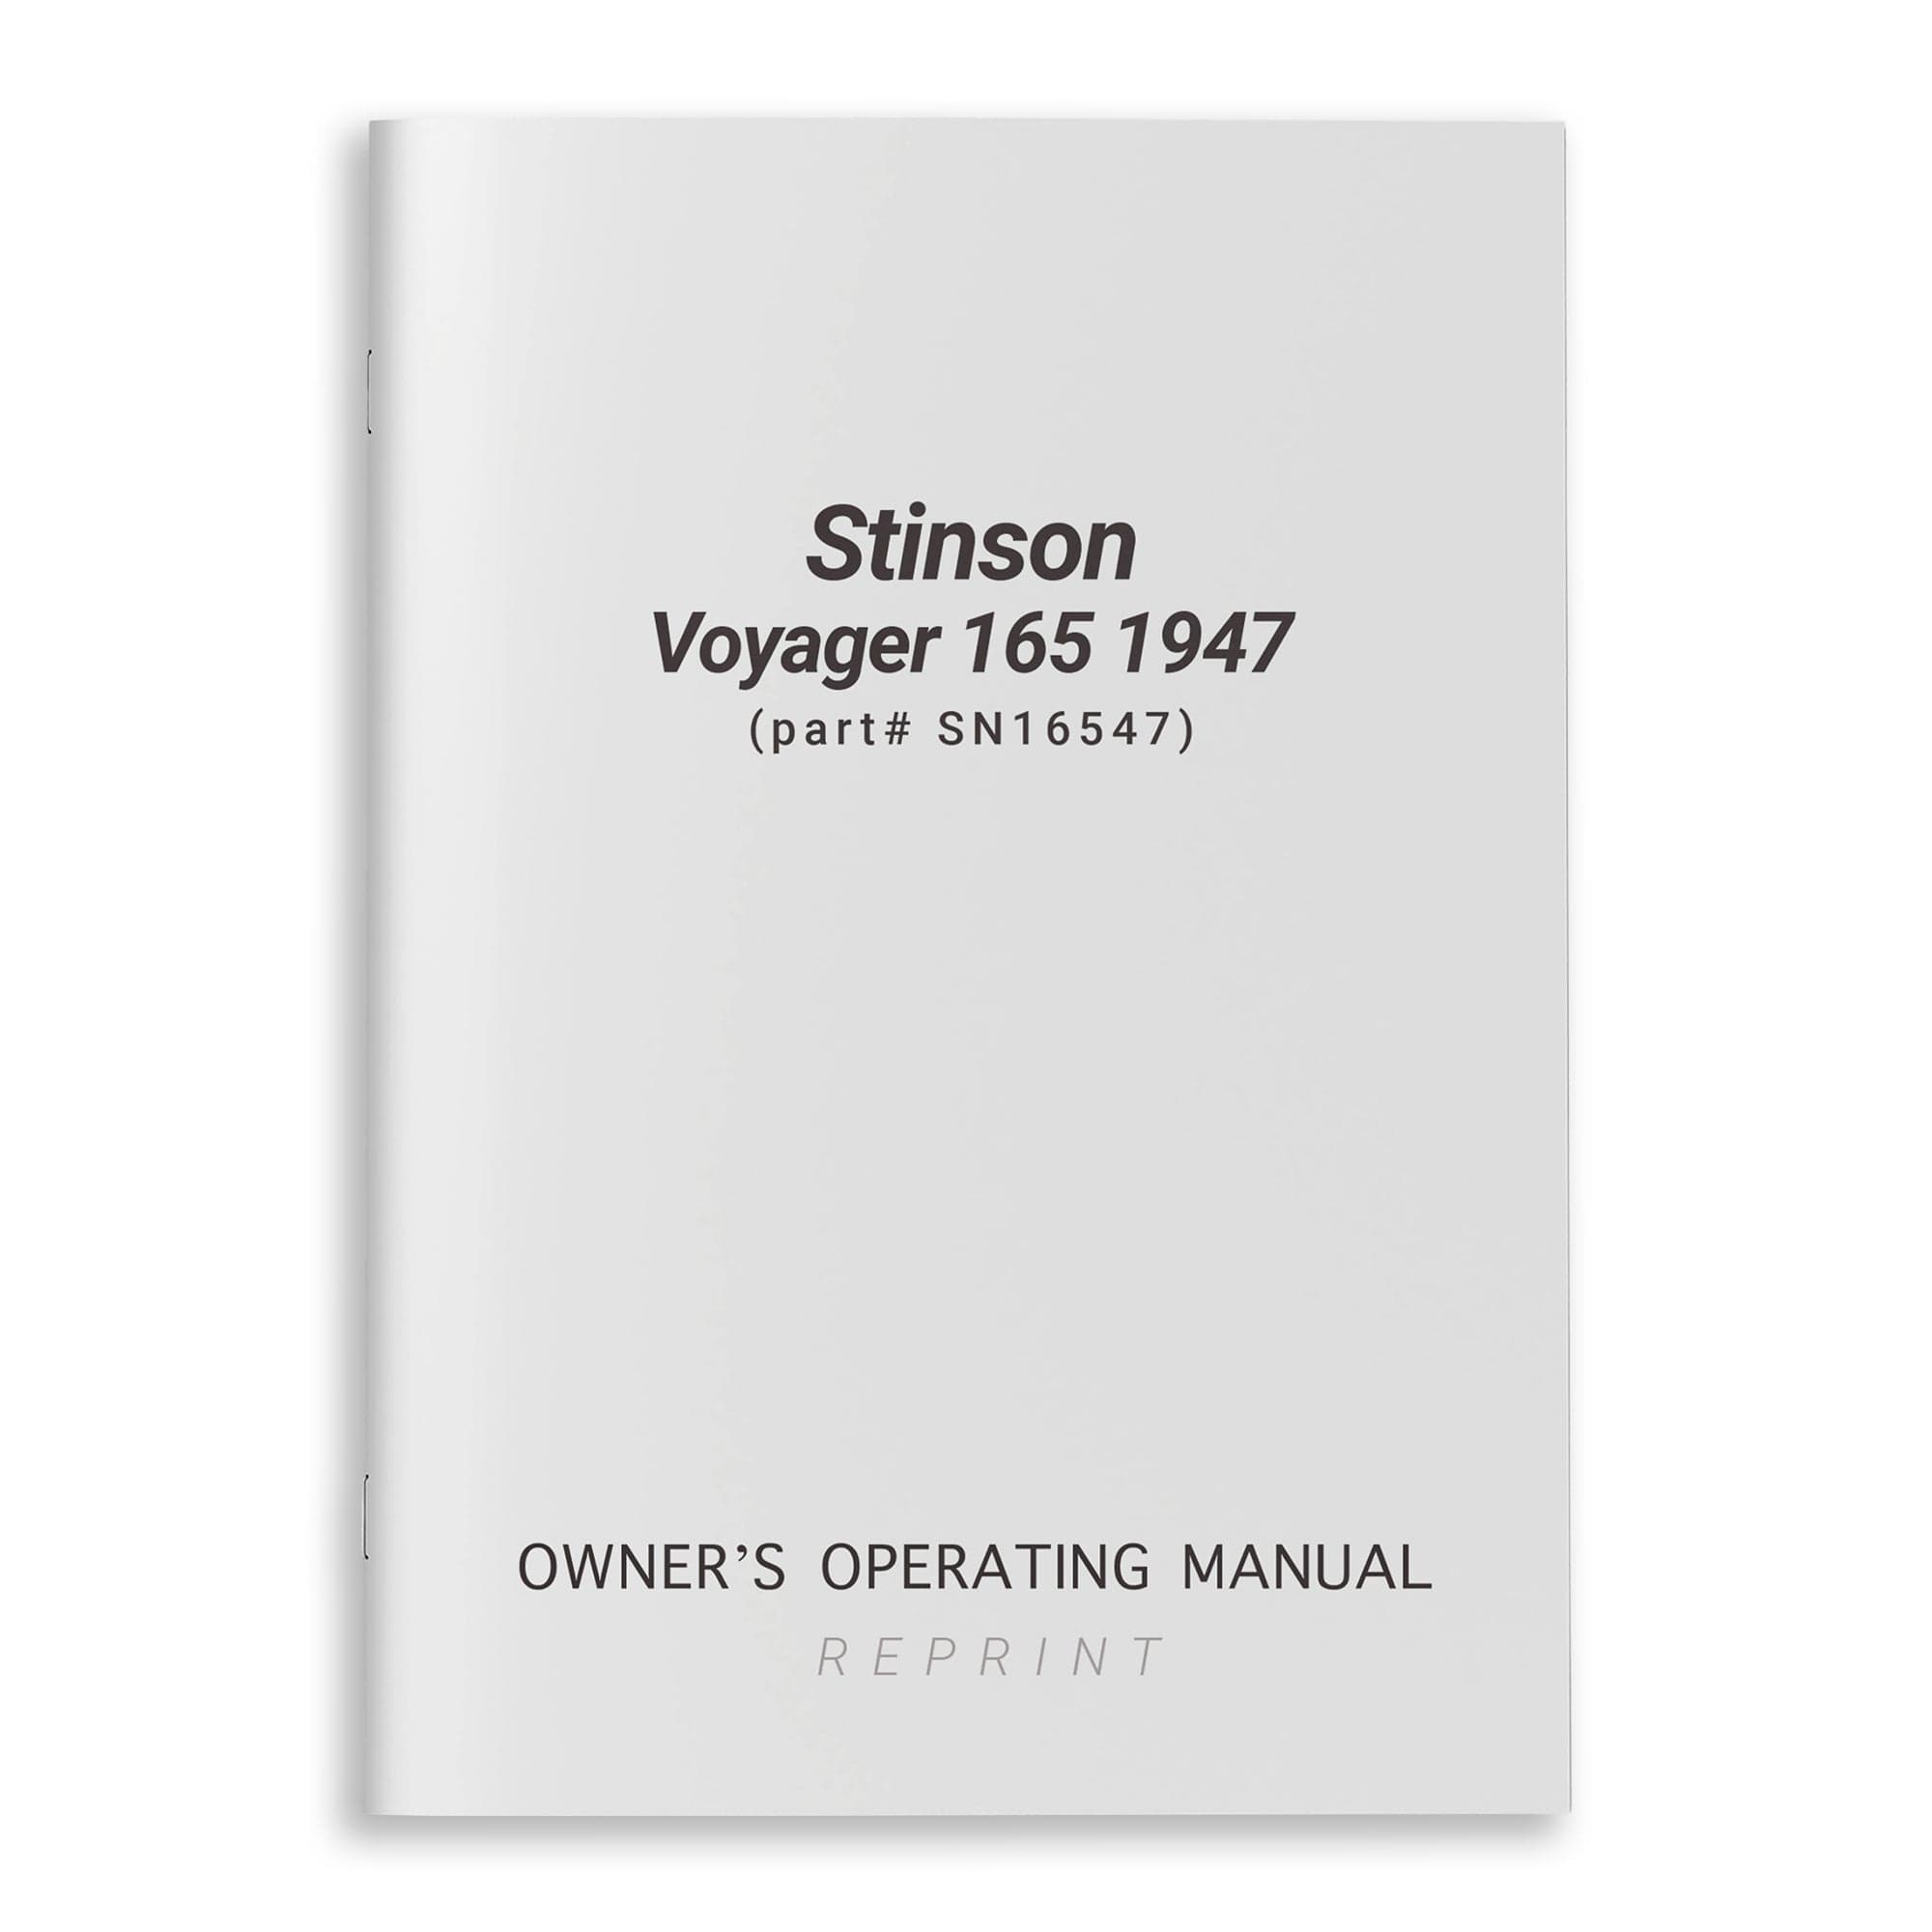 Stinson Voyager 165 1947 Owner's Operating Manual (part# SN16547) - PilotMall.com